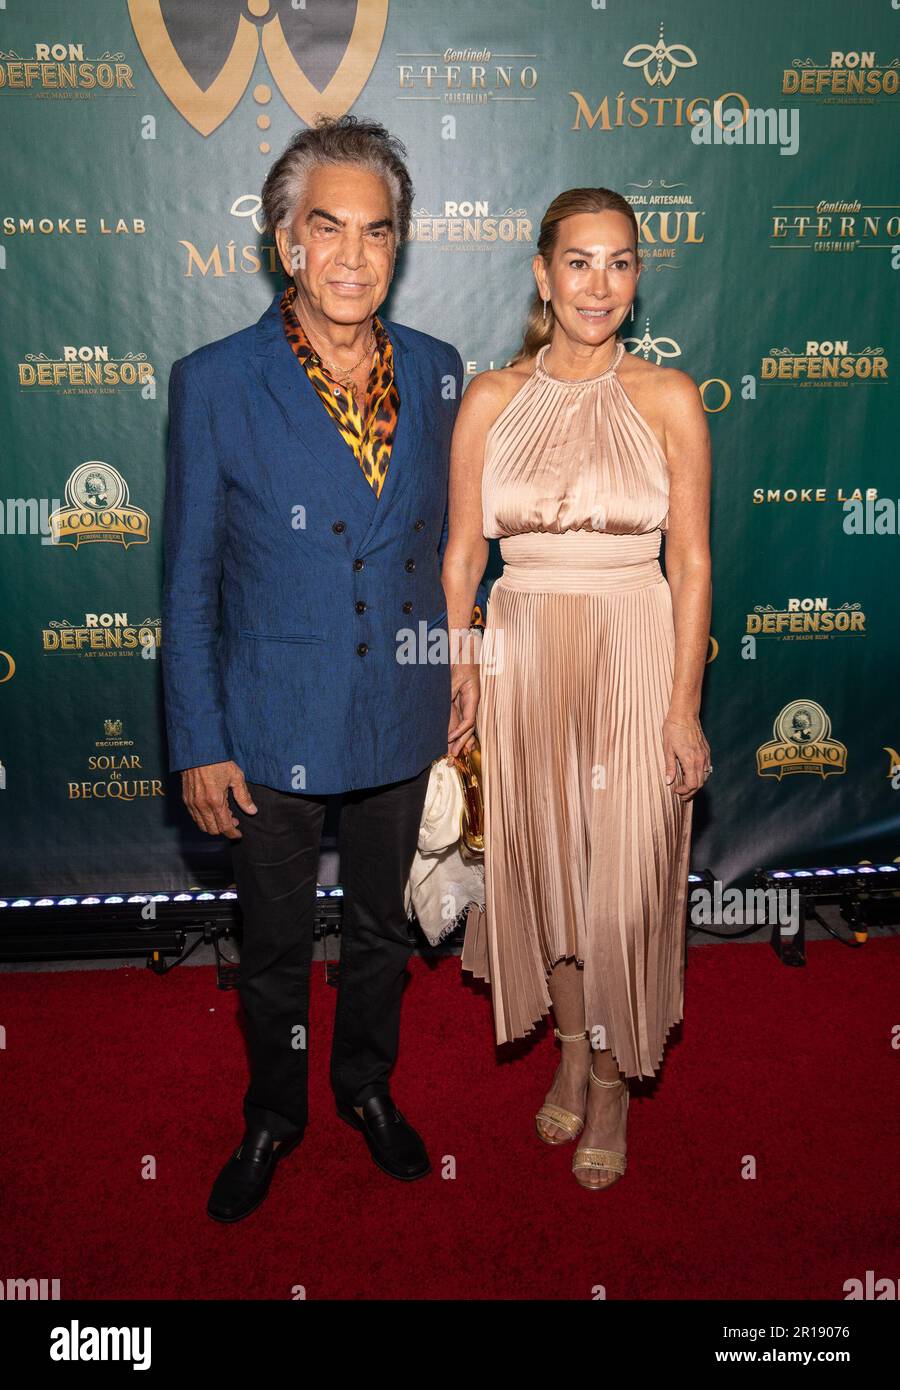 CORAL GABLES, FL-MAY 11: Jose Luis Rodriguez “El Puma” and Carolina Perez are seen during the opening of Gilberto Santa Rosa and Silvester Dangon restaurant “Mistico” on May 11, 2023 in Coral Gables, Florida.s (Photo by Alberto E. Tamargo/Sipa USA) Stock Photo